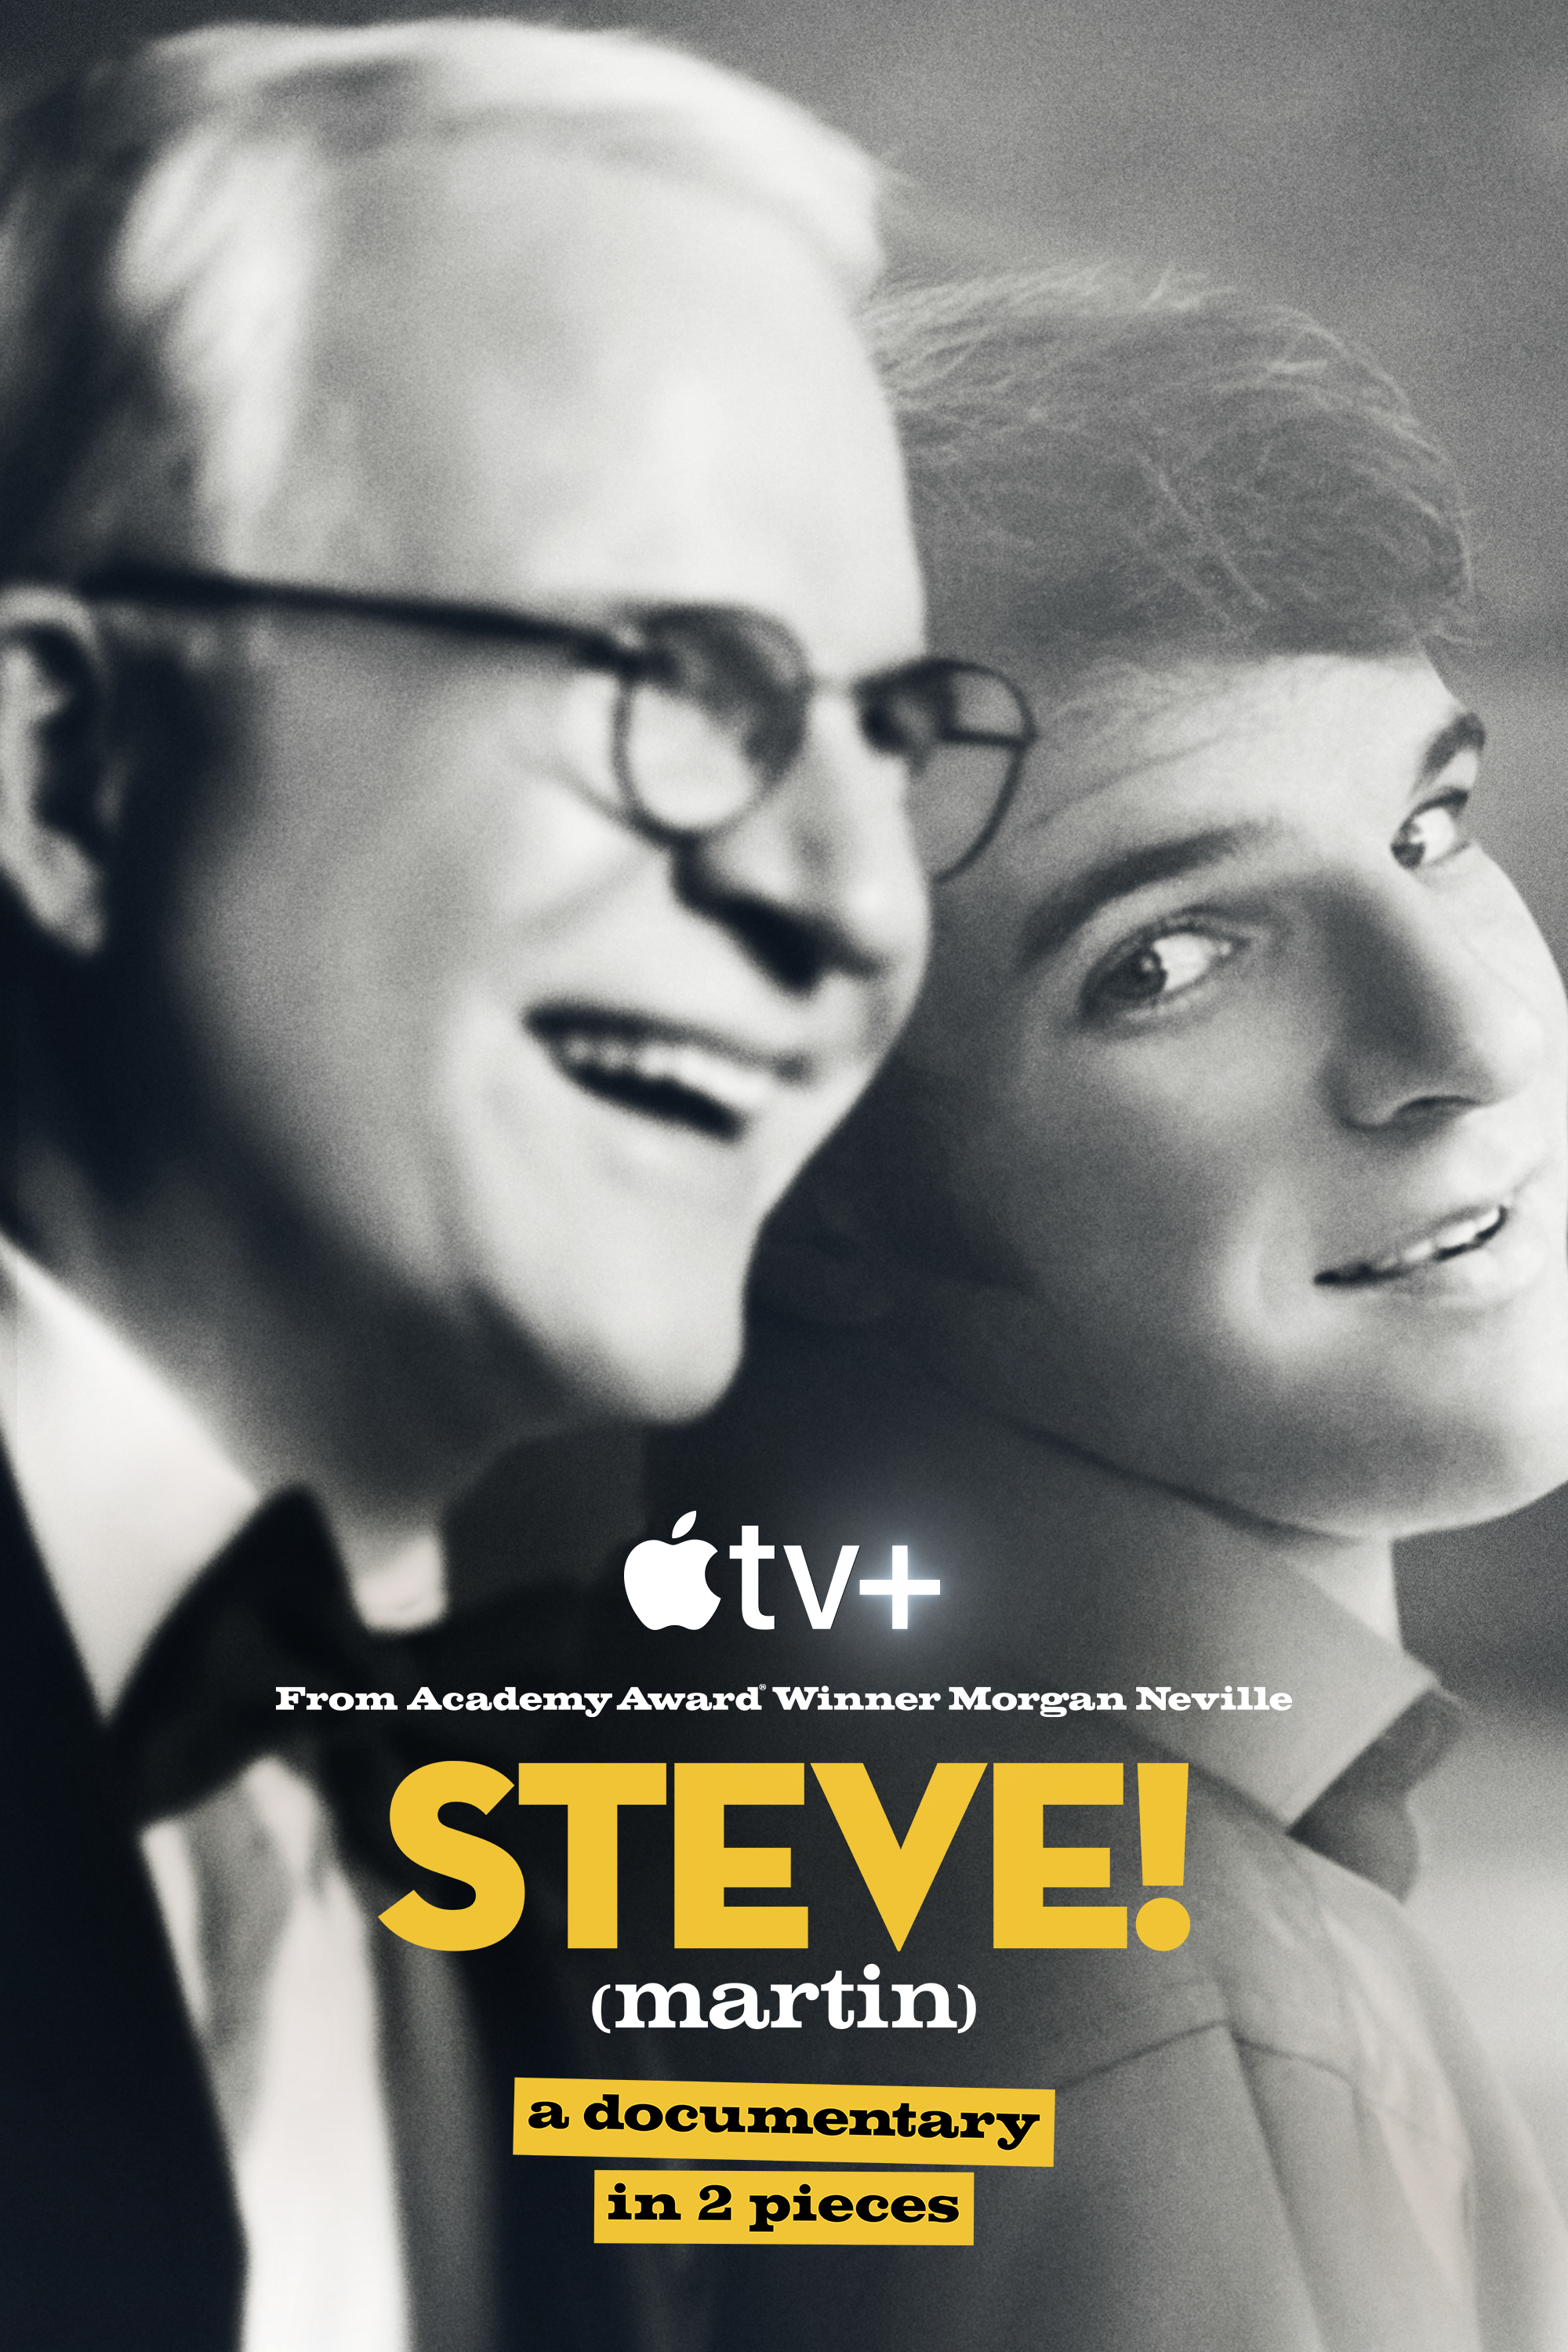 Steve! (martin) a documentary in 2 pieces: Miniseries | Rotten Tomatoes